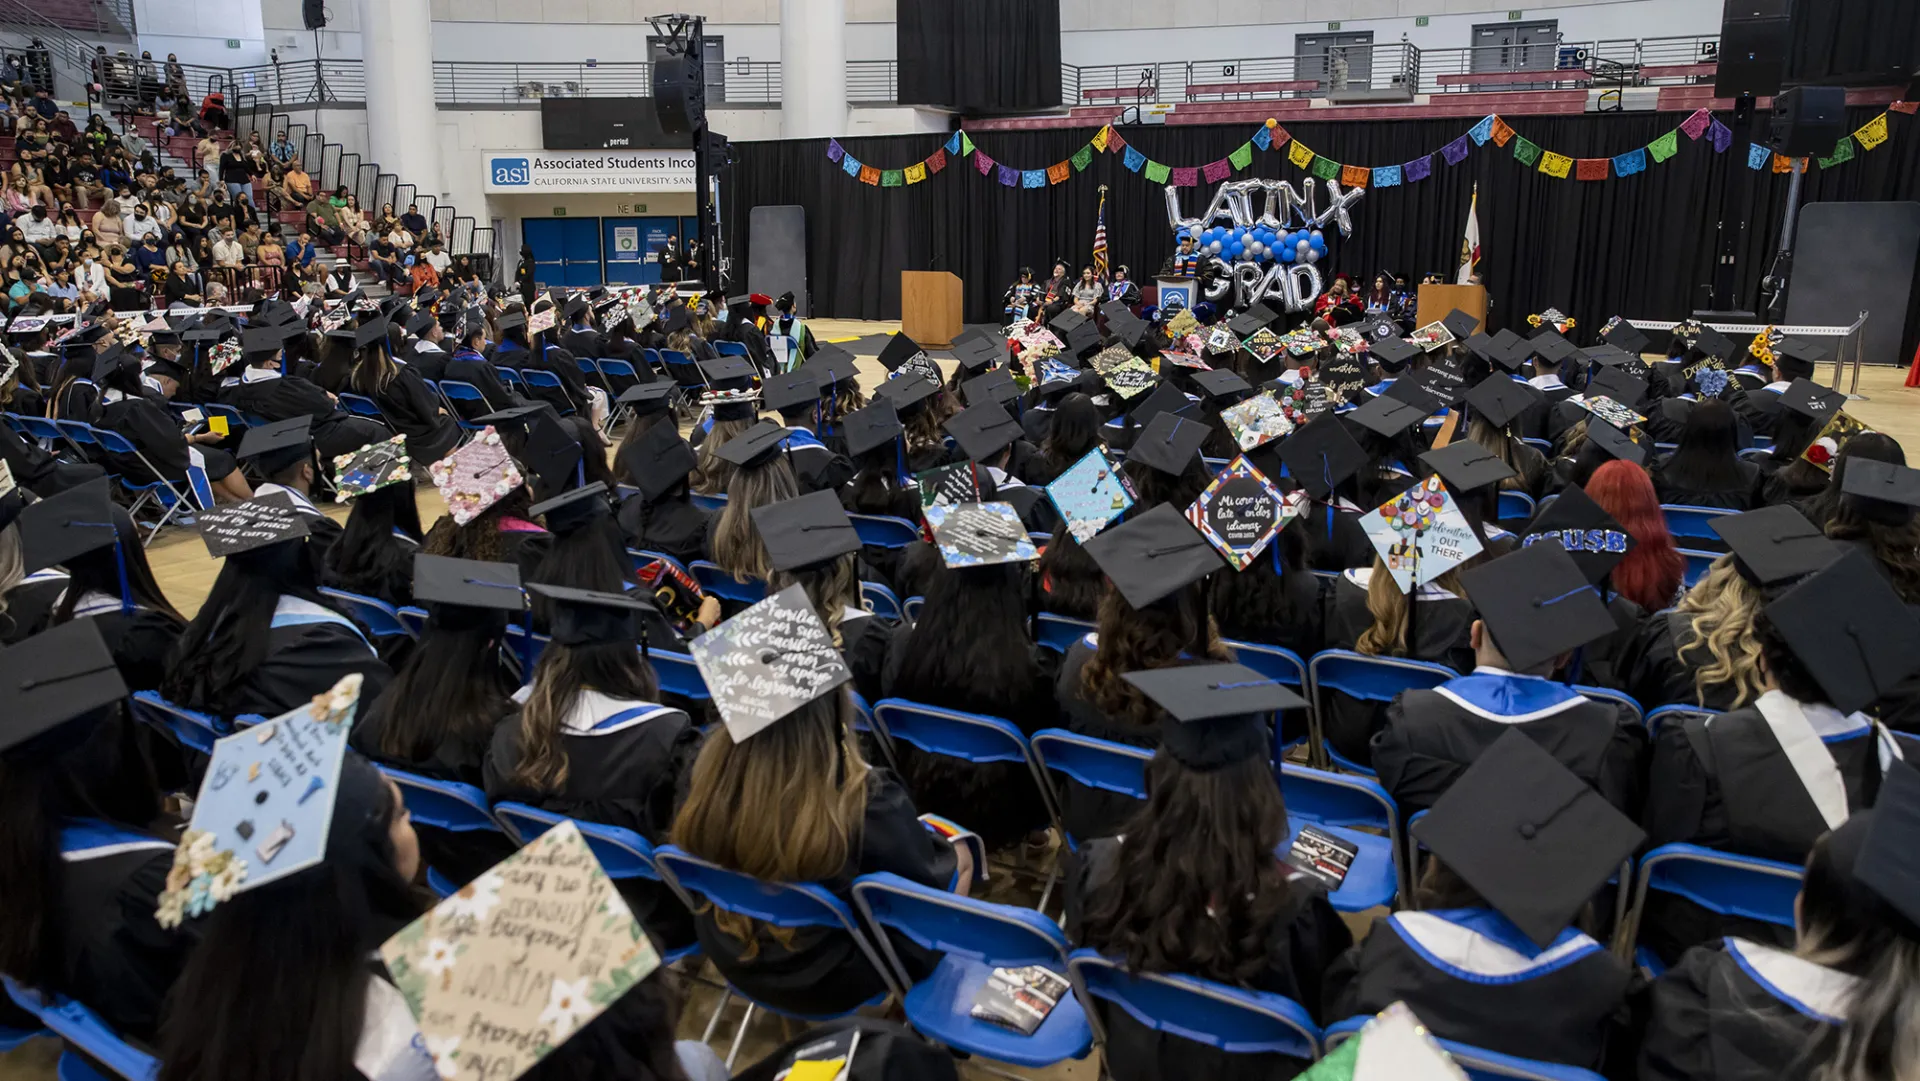 Students at the LatinX Graduation Recognition Ceremony at Coussoulis Arena in May.